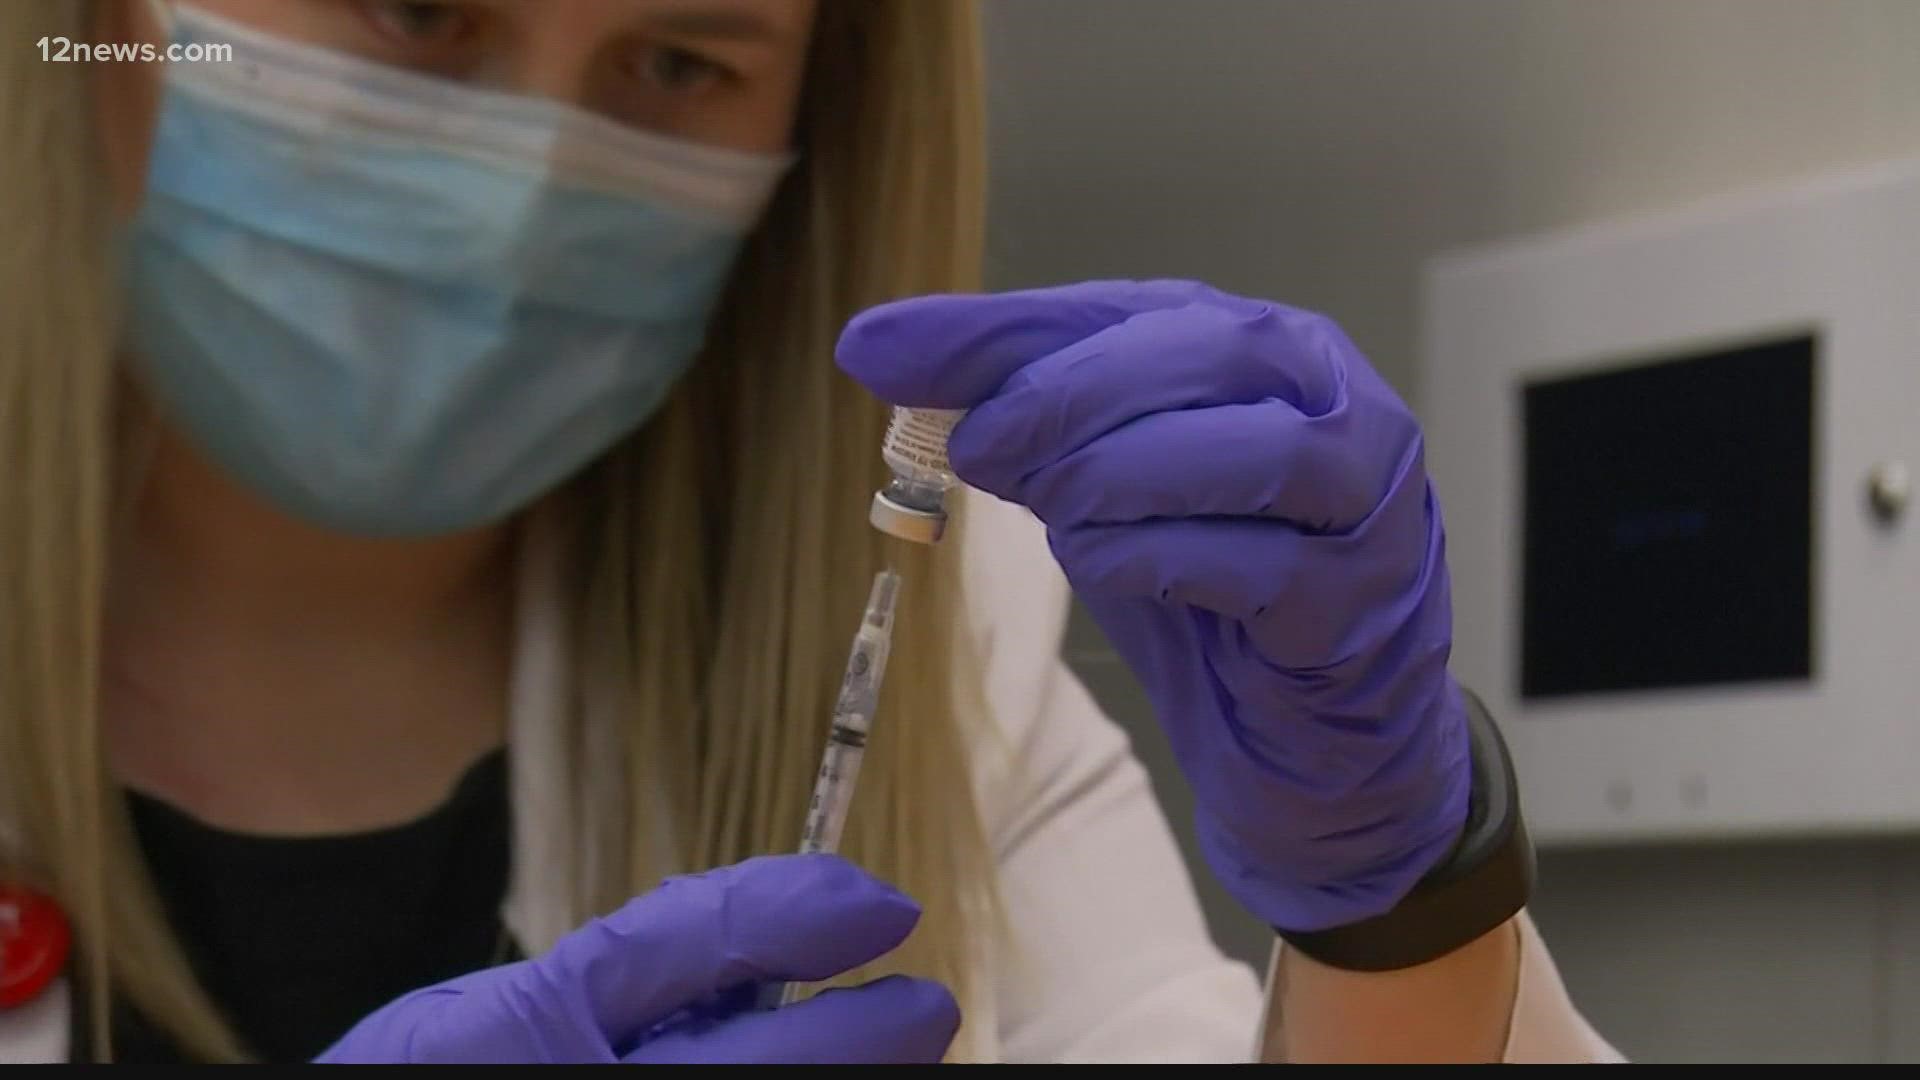 Health experts hope more people will be motivated to get the COVID-19 vaccine now that the FDA has fully approved Pfizer's vaccine. Hesitation remains in the Valley.